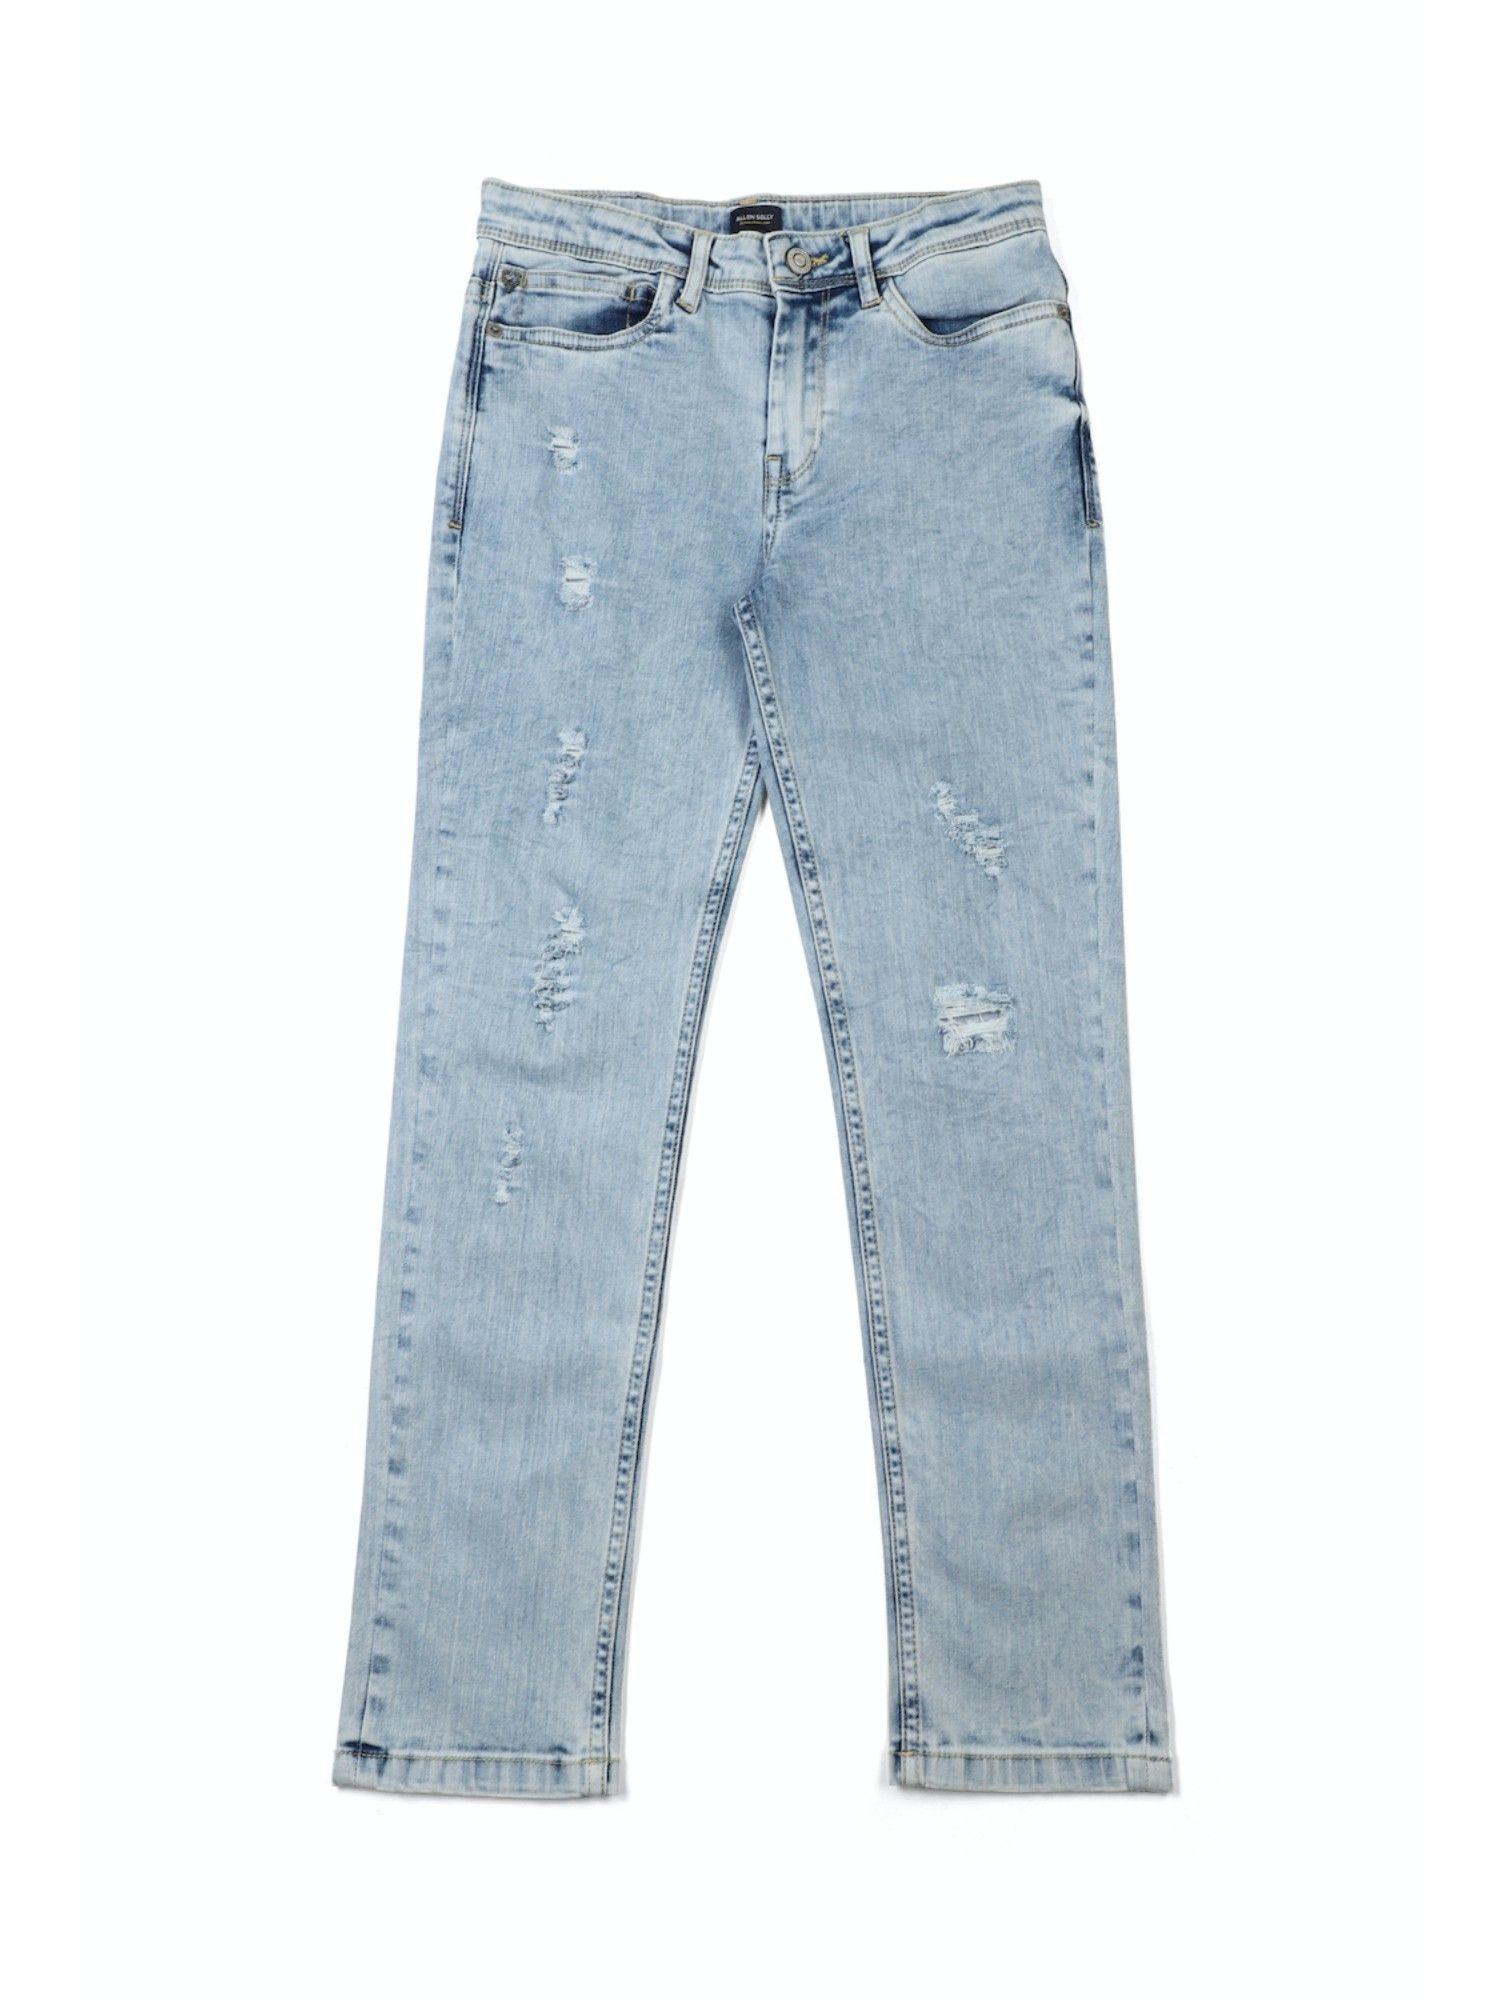 Boys Blue Solid Jeans